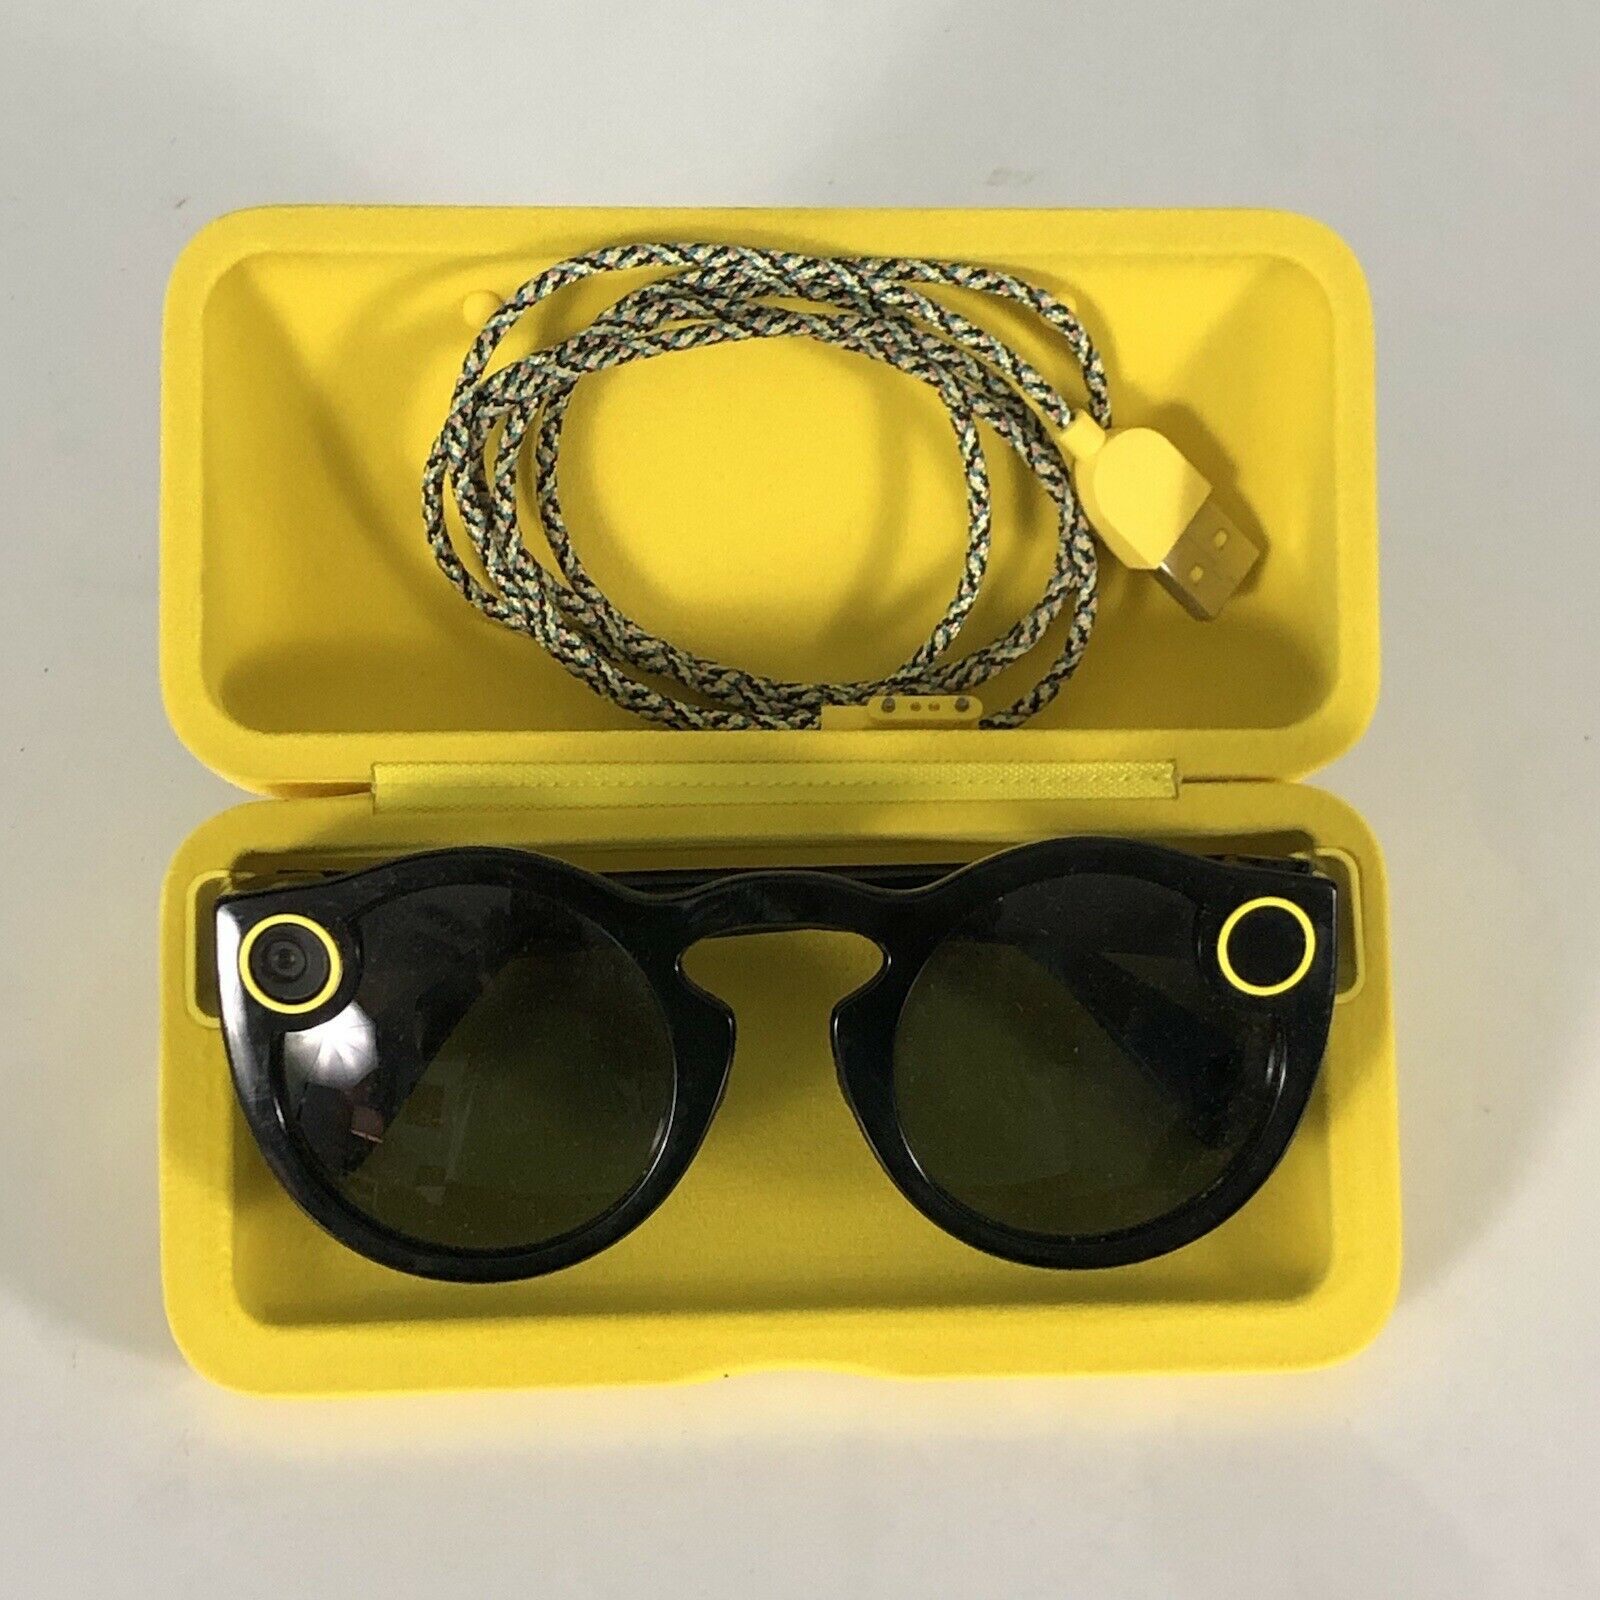 Snapchat Spectacles Glasses - Onyx Eclipse